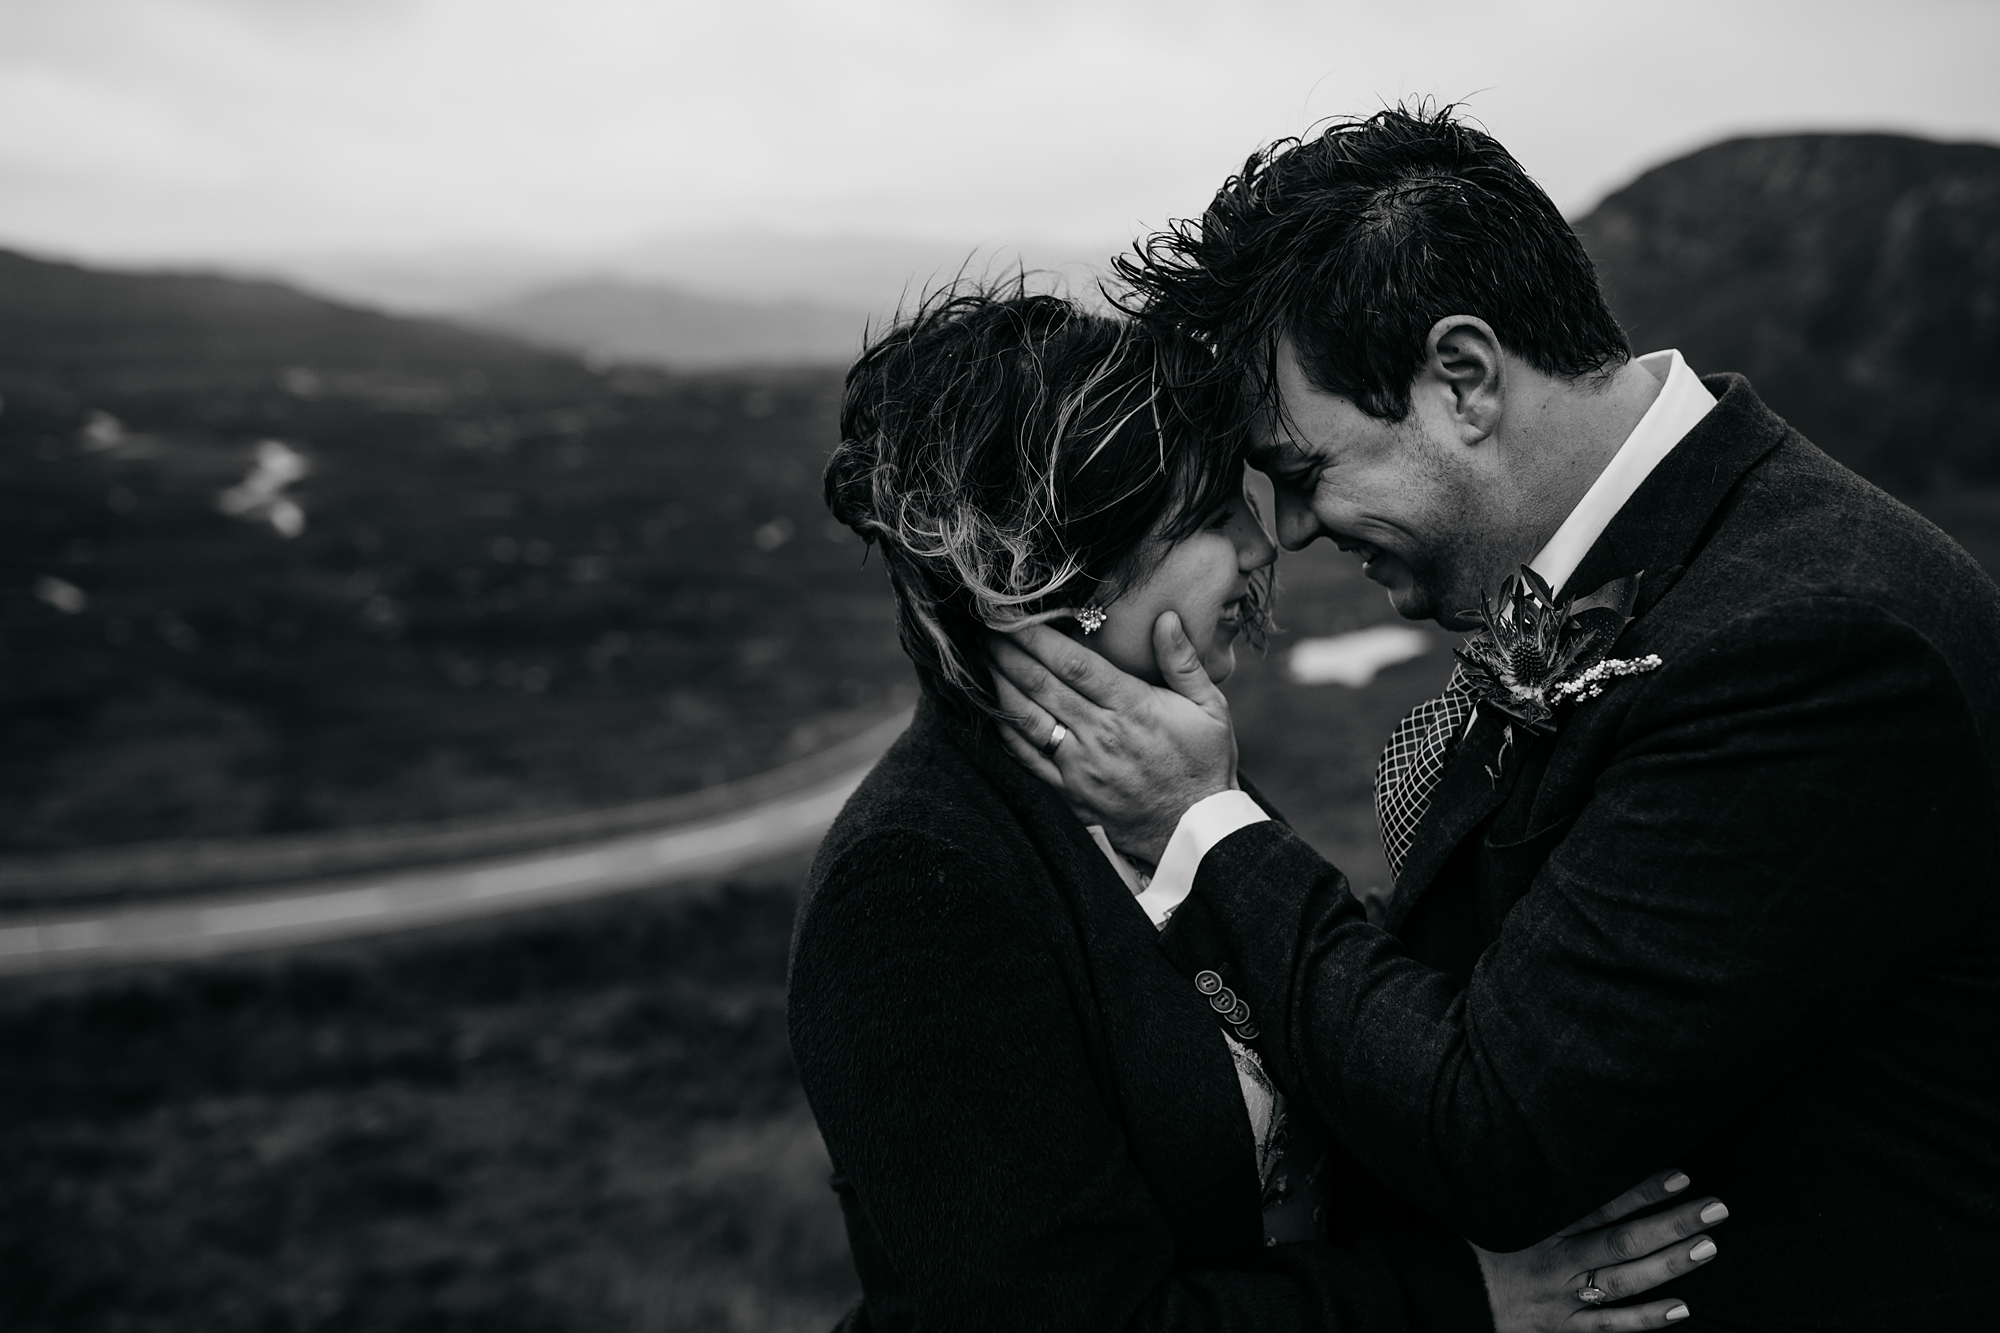 A couple embrace tightly in the rain - best wedding photographs